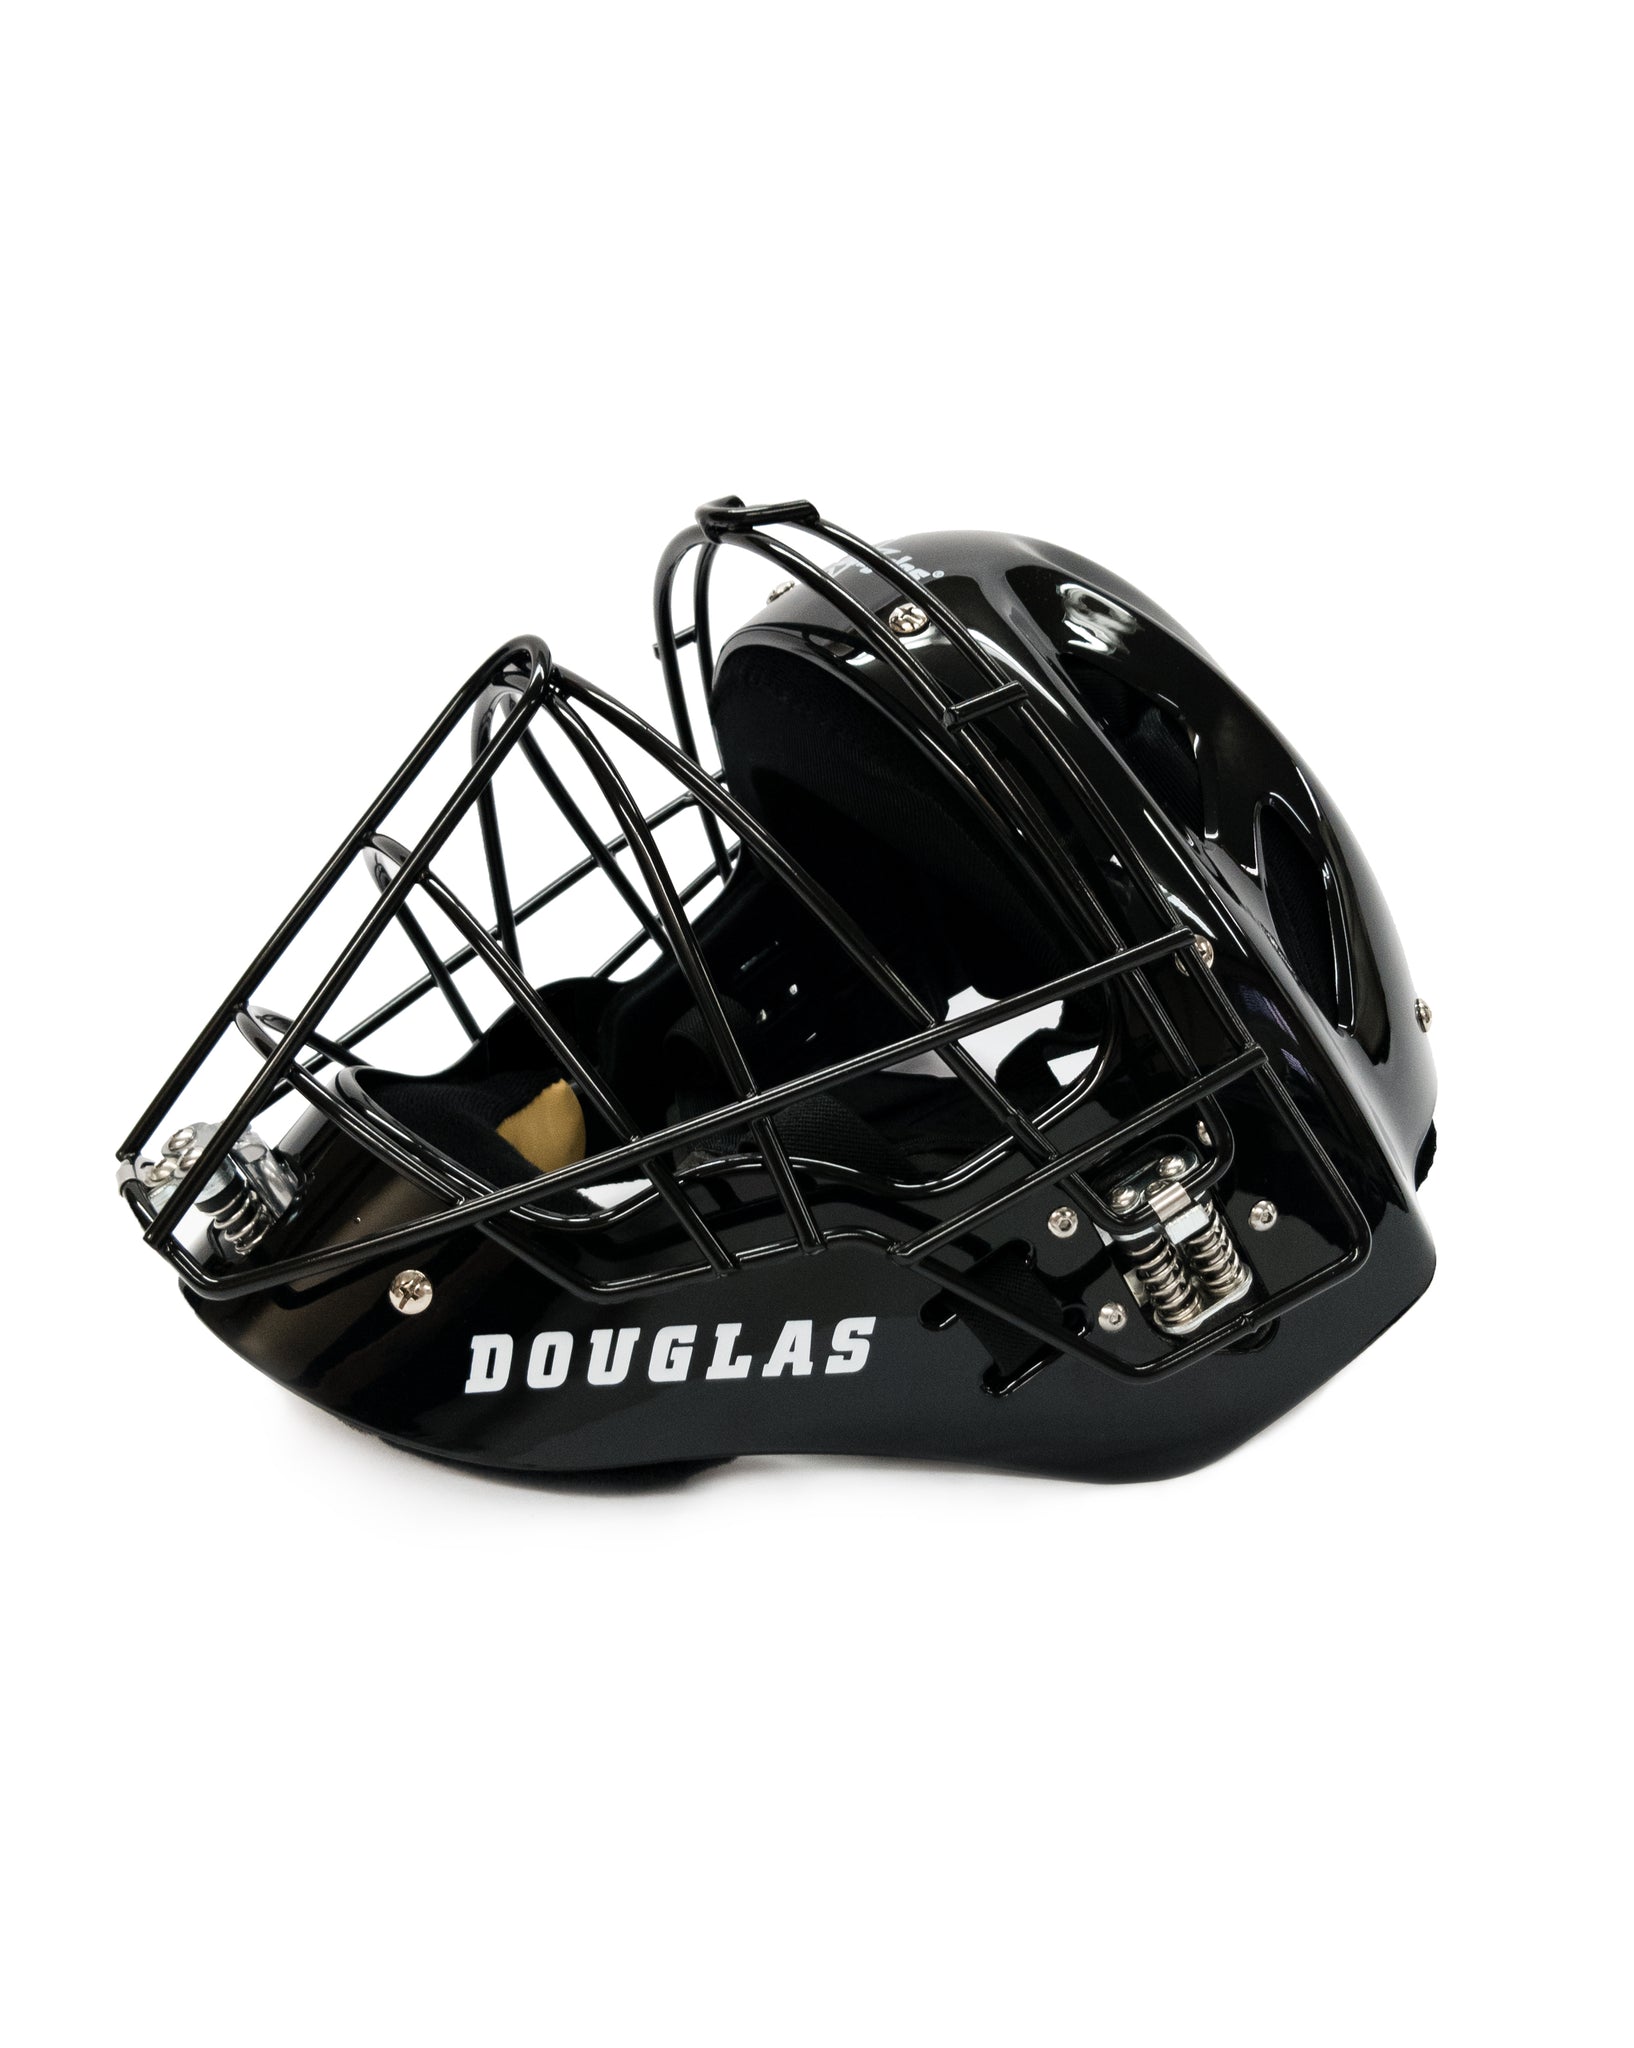 SPE-HFM - Douglas Hockey Style Face Mask with Shock Suspension System (S3)